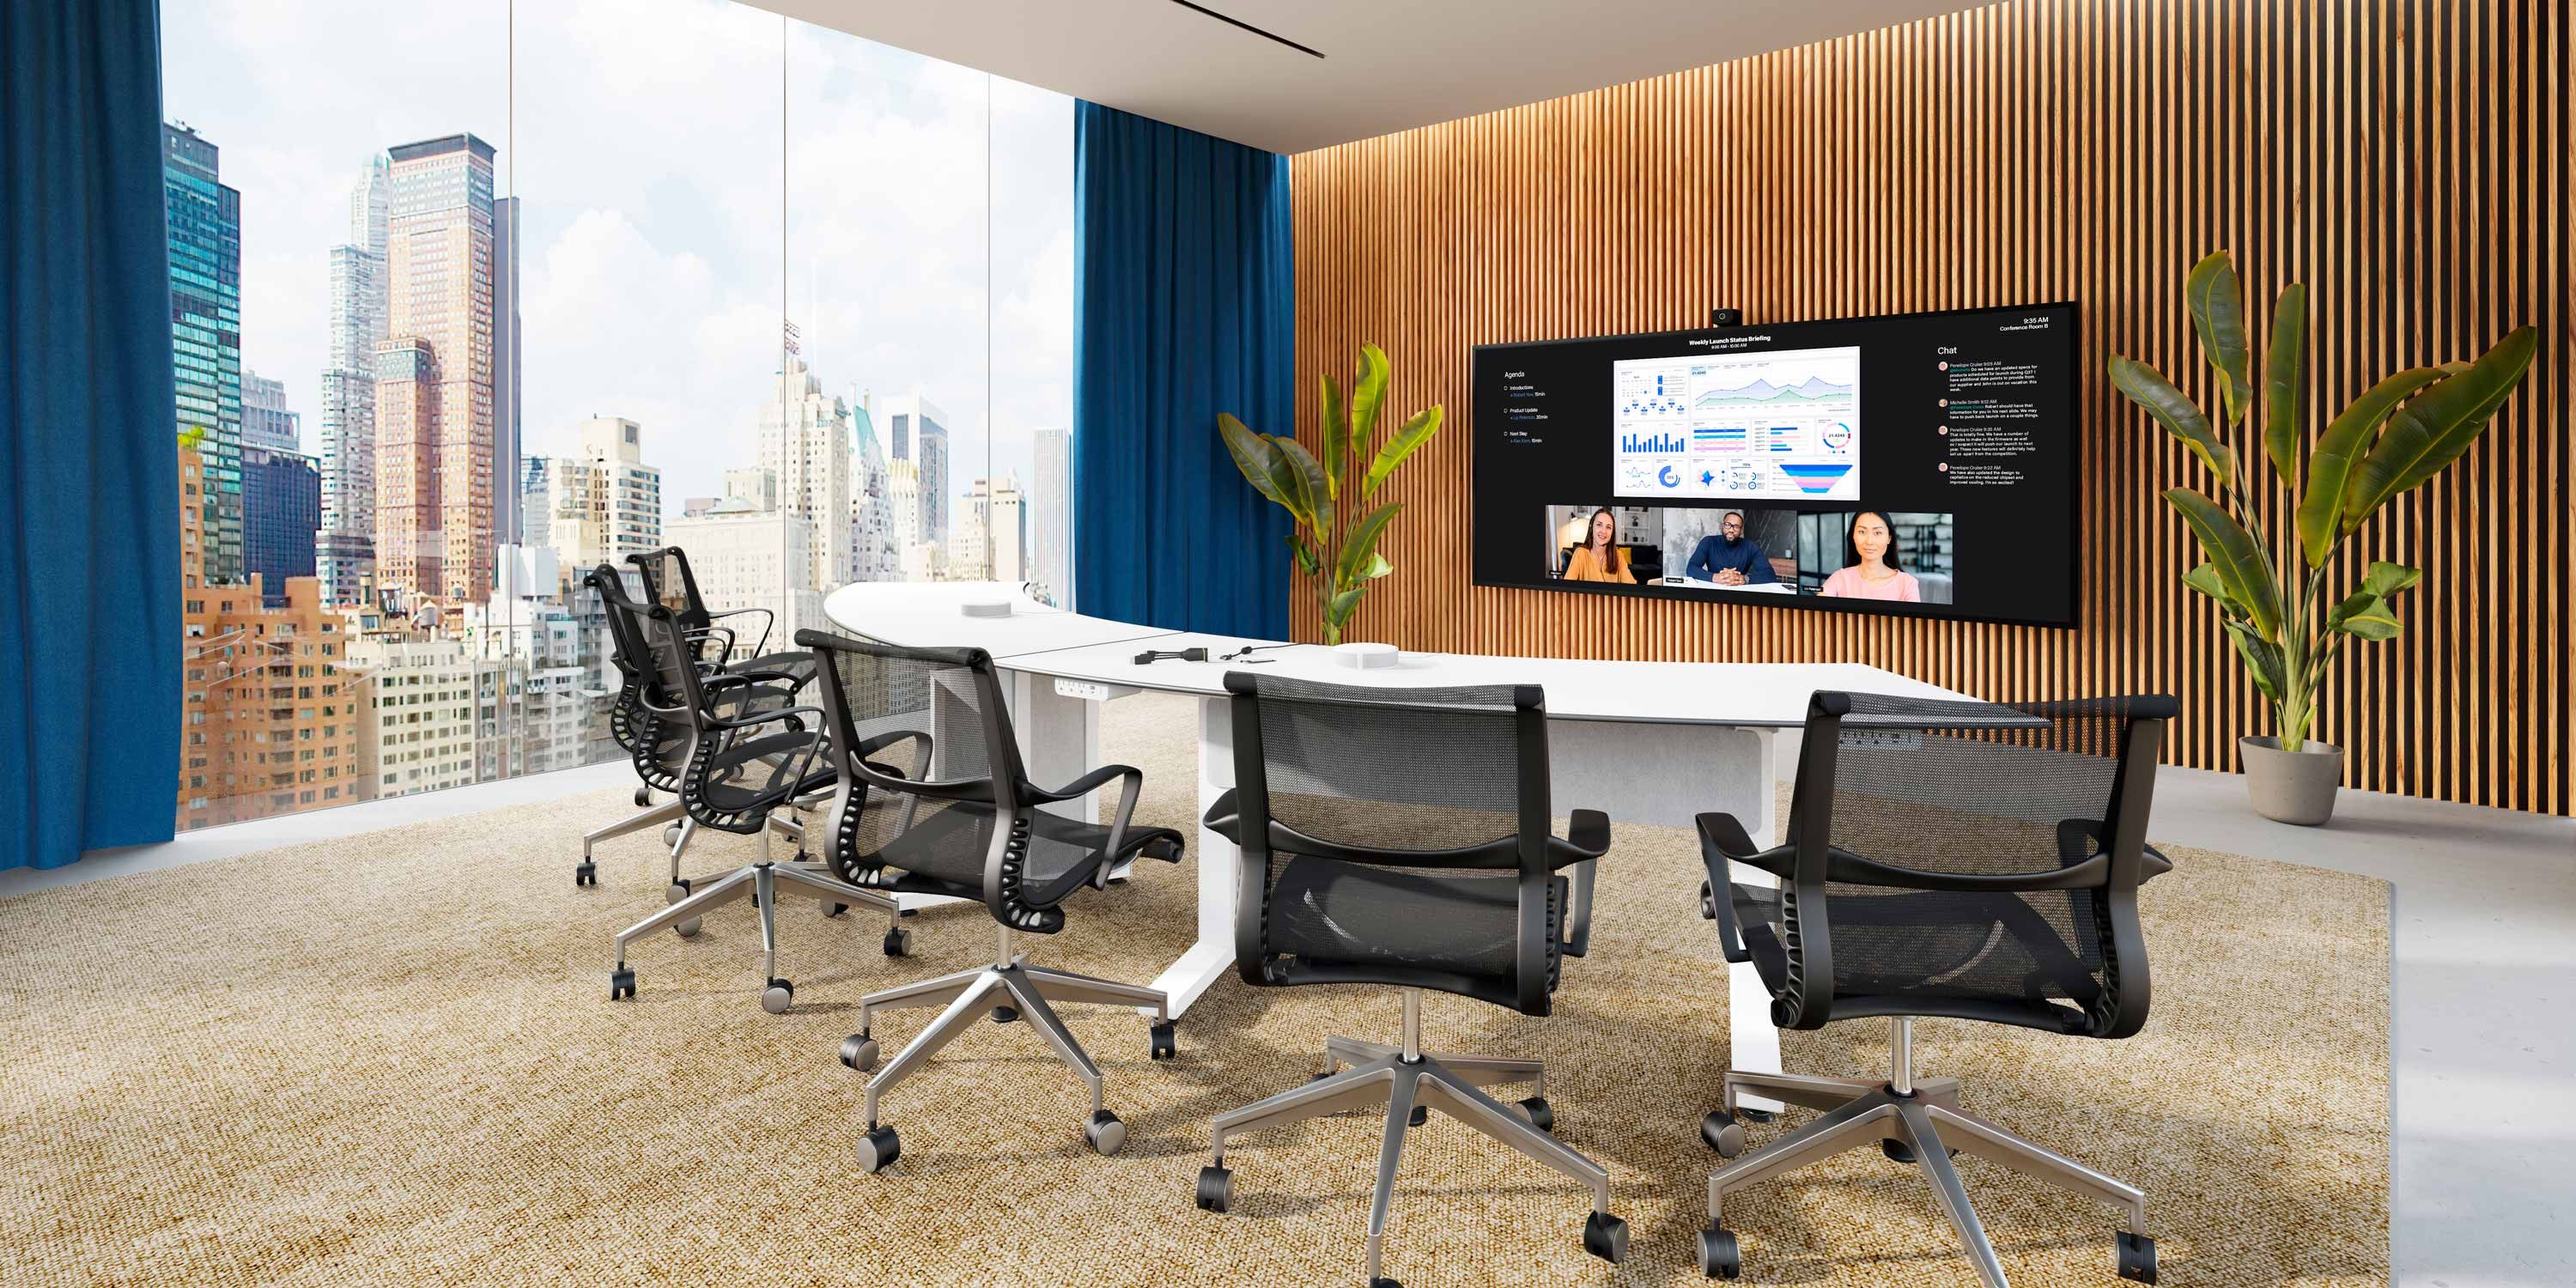 conference room with presentation technology and blue curtains looking out at a city